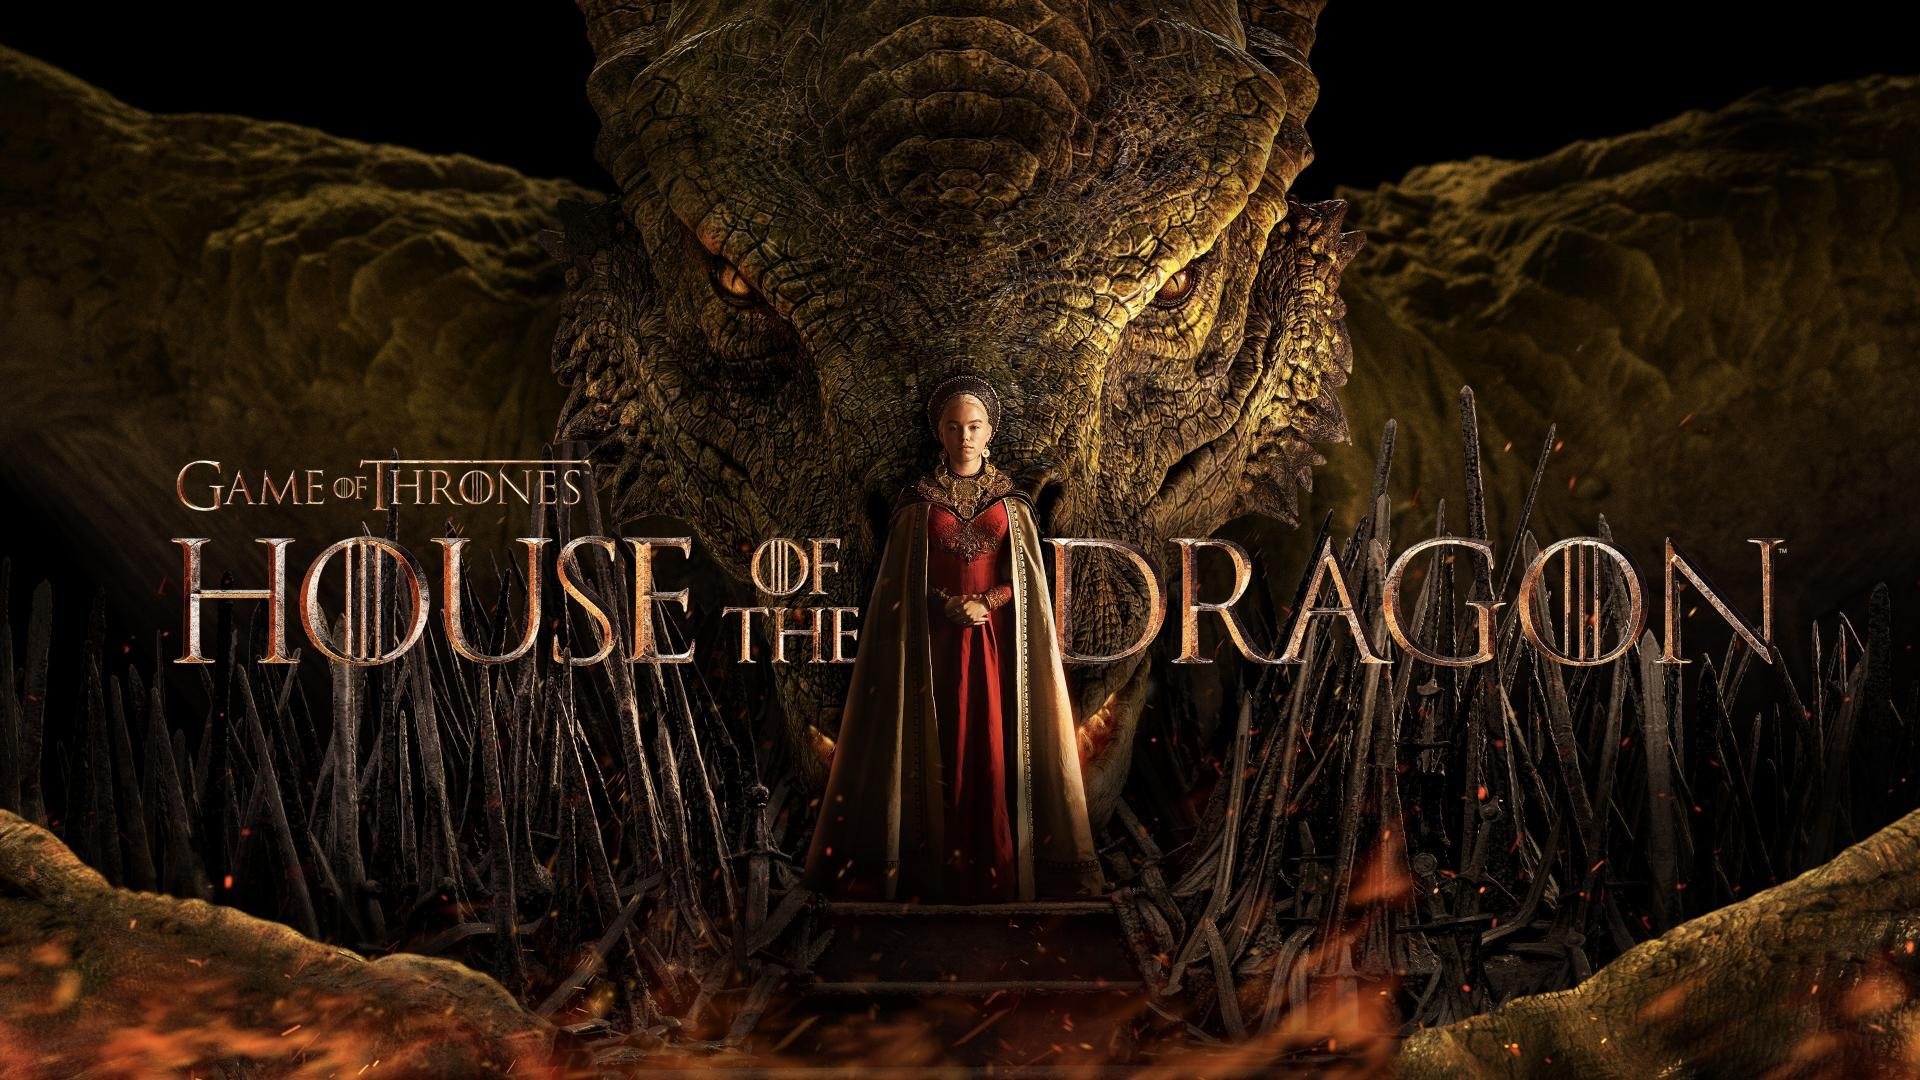 Watch House of the Dragon Season 1 Episode 4 ONLINE STREAMING ON  123𝓶𝓸𝓿𝓲𝓮𝓼.pdf